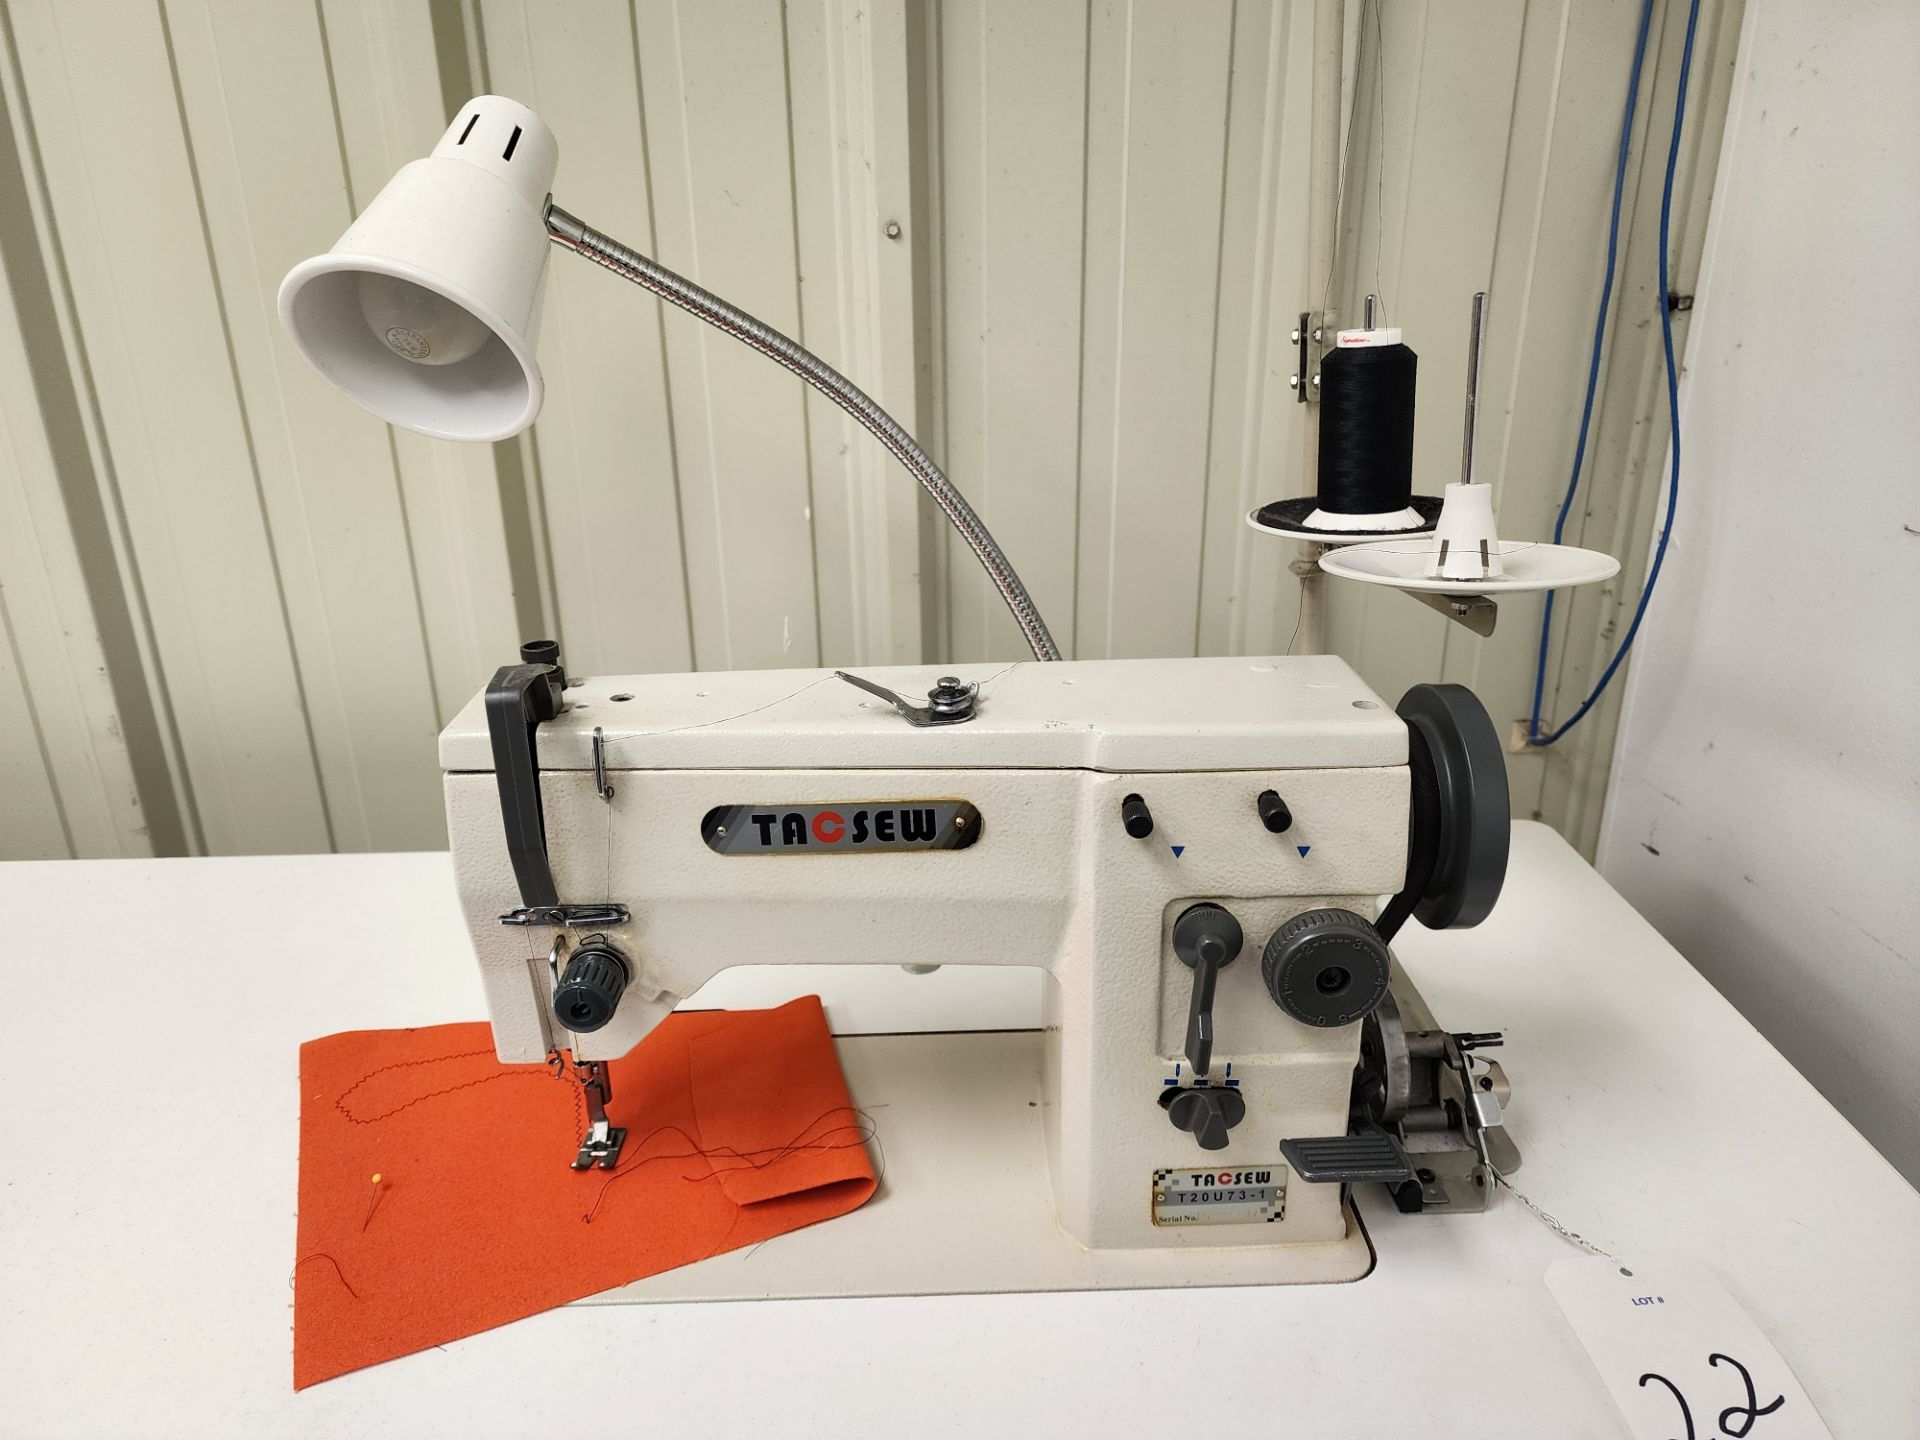 Tacsew Model T20U73-1 Commercial Sewing Machine, S/N 15031107 - Image 2 of 4